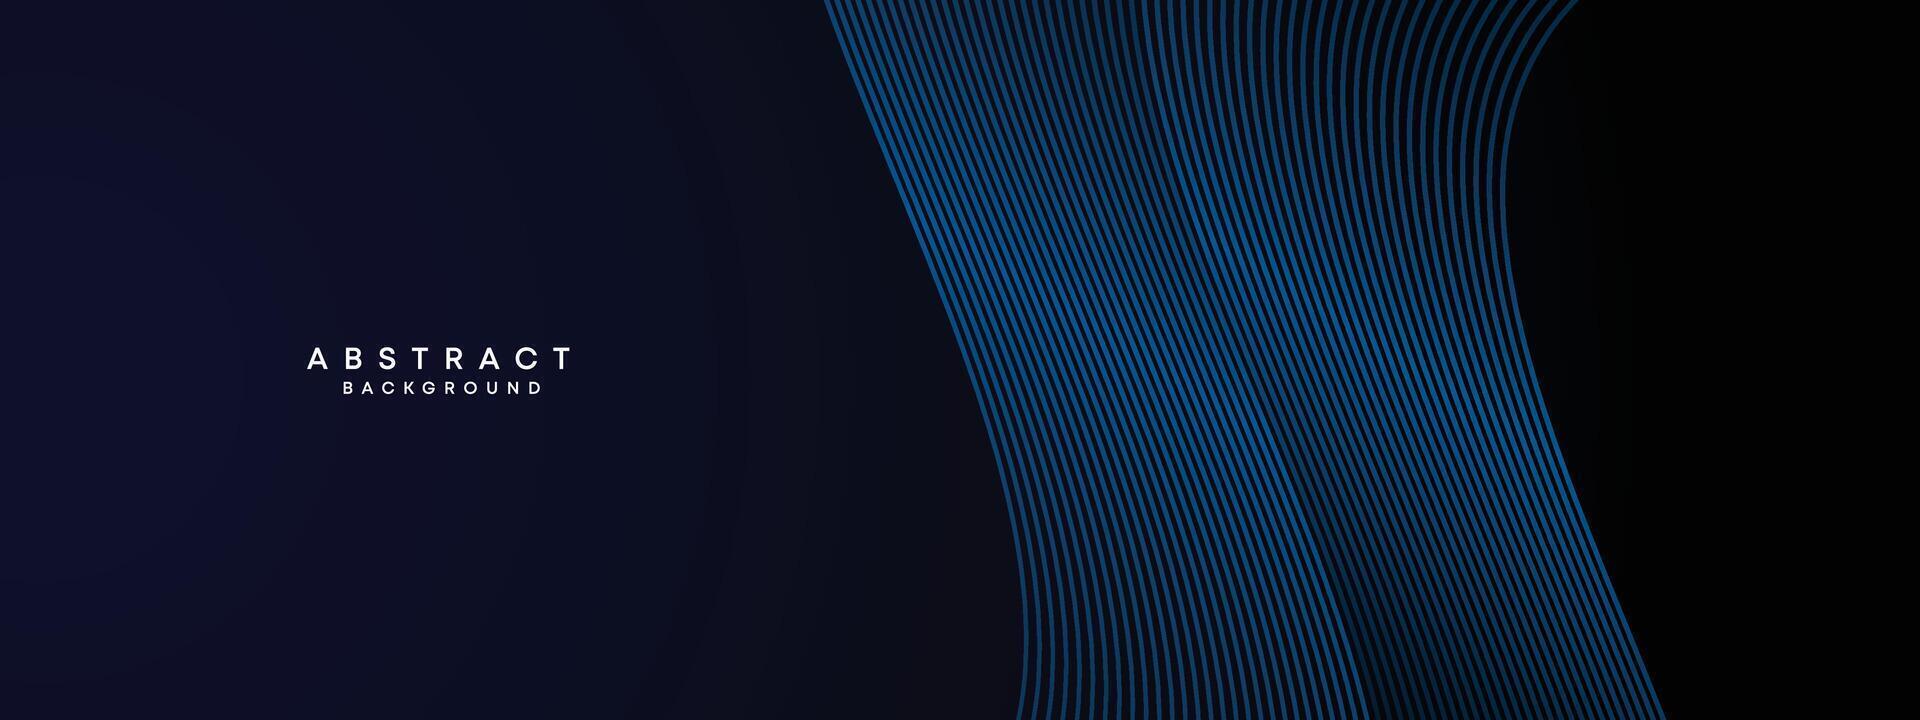 Dark Navy Blue Abstract Waving Circles Lines Technology Background. Modern Blue Gradient with Glowing Lines Shiny Geometric Shape Diagonal. for Brochure, Cover, Poster, Banner, Website, Header, flyer vector